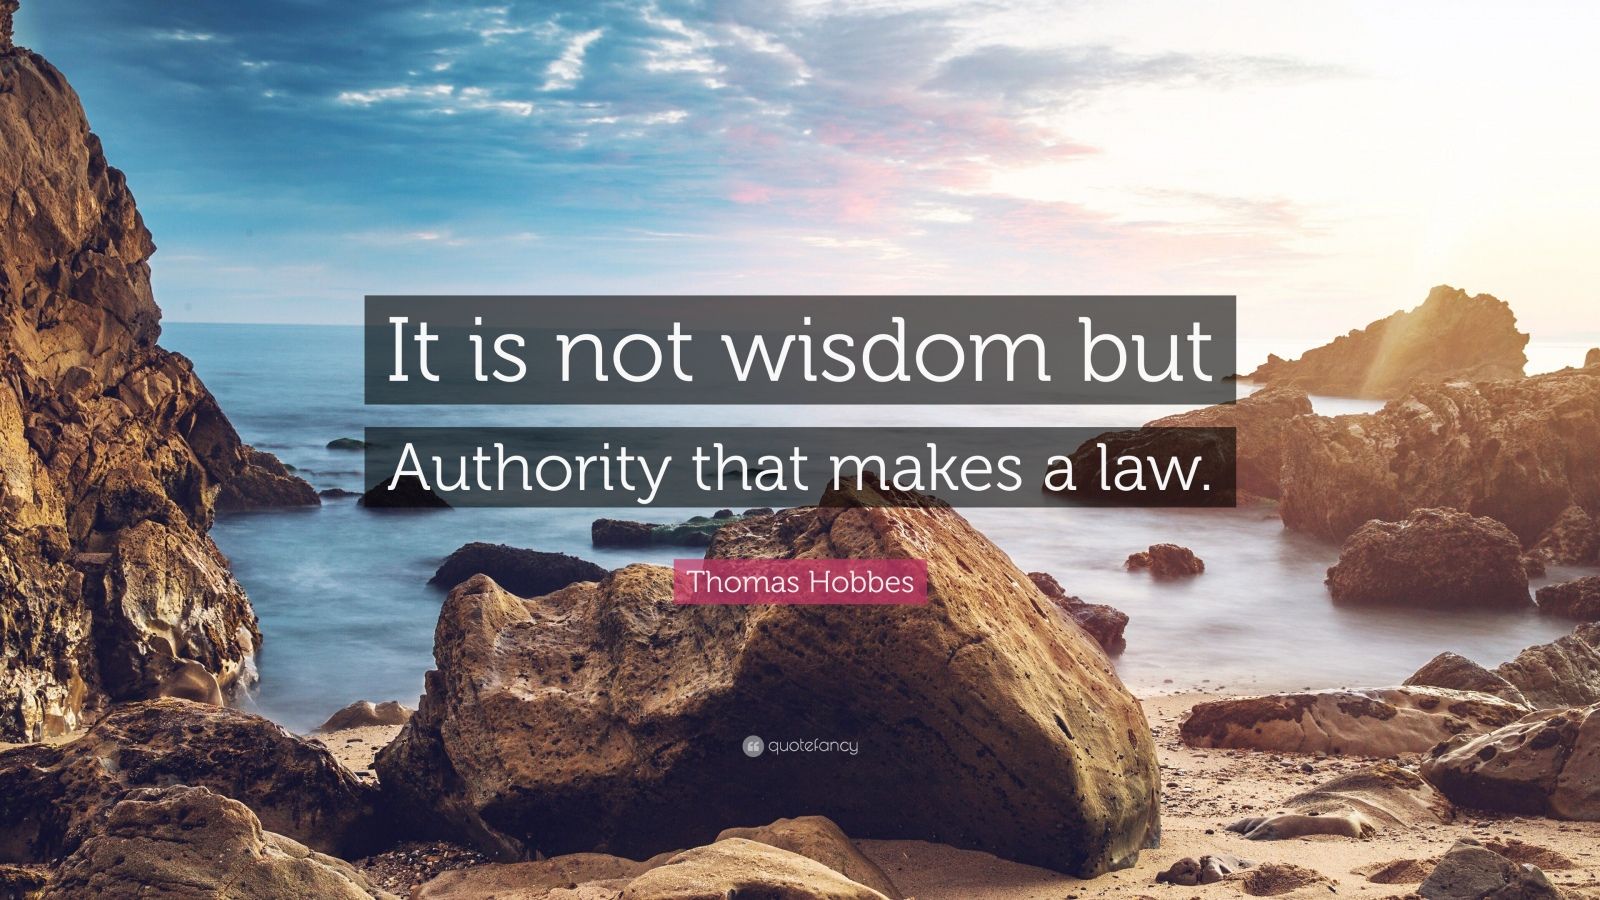 Thomas Hobbes Quote: “It is not wisdom but Authority that makes a law.”